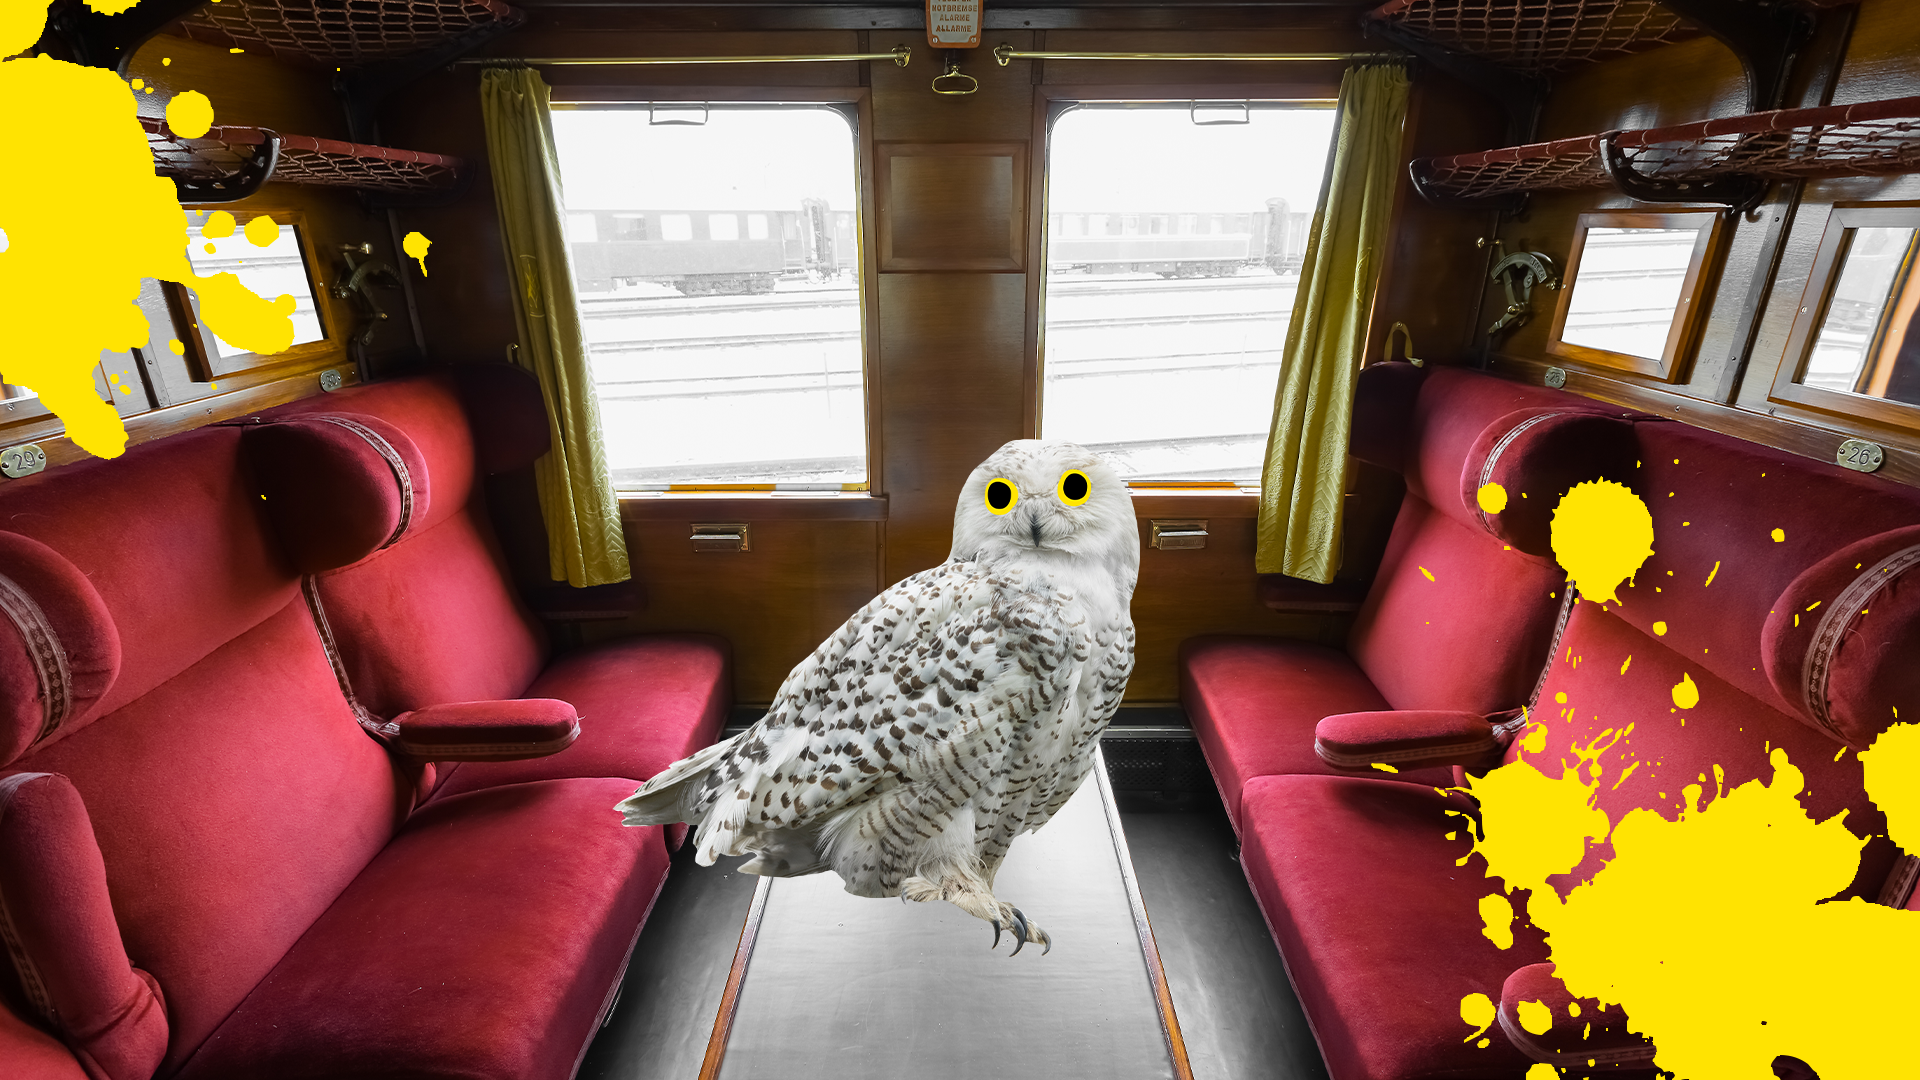 Train carriage, Hedwig and yellow splats 